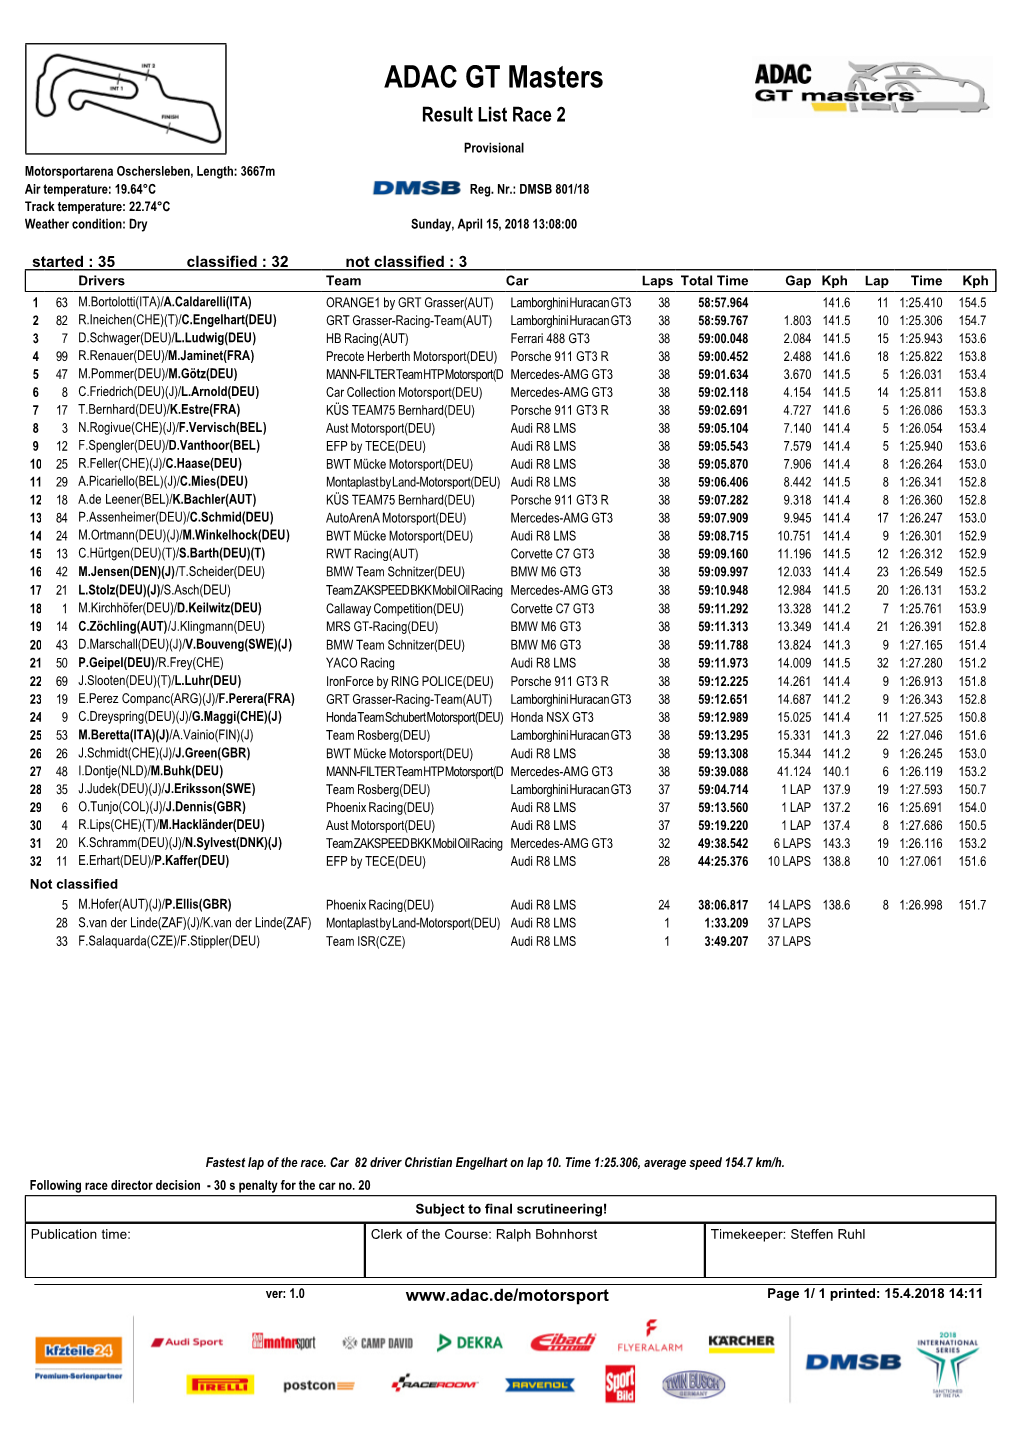 ADAC GT Masters Result List Race 2